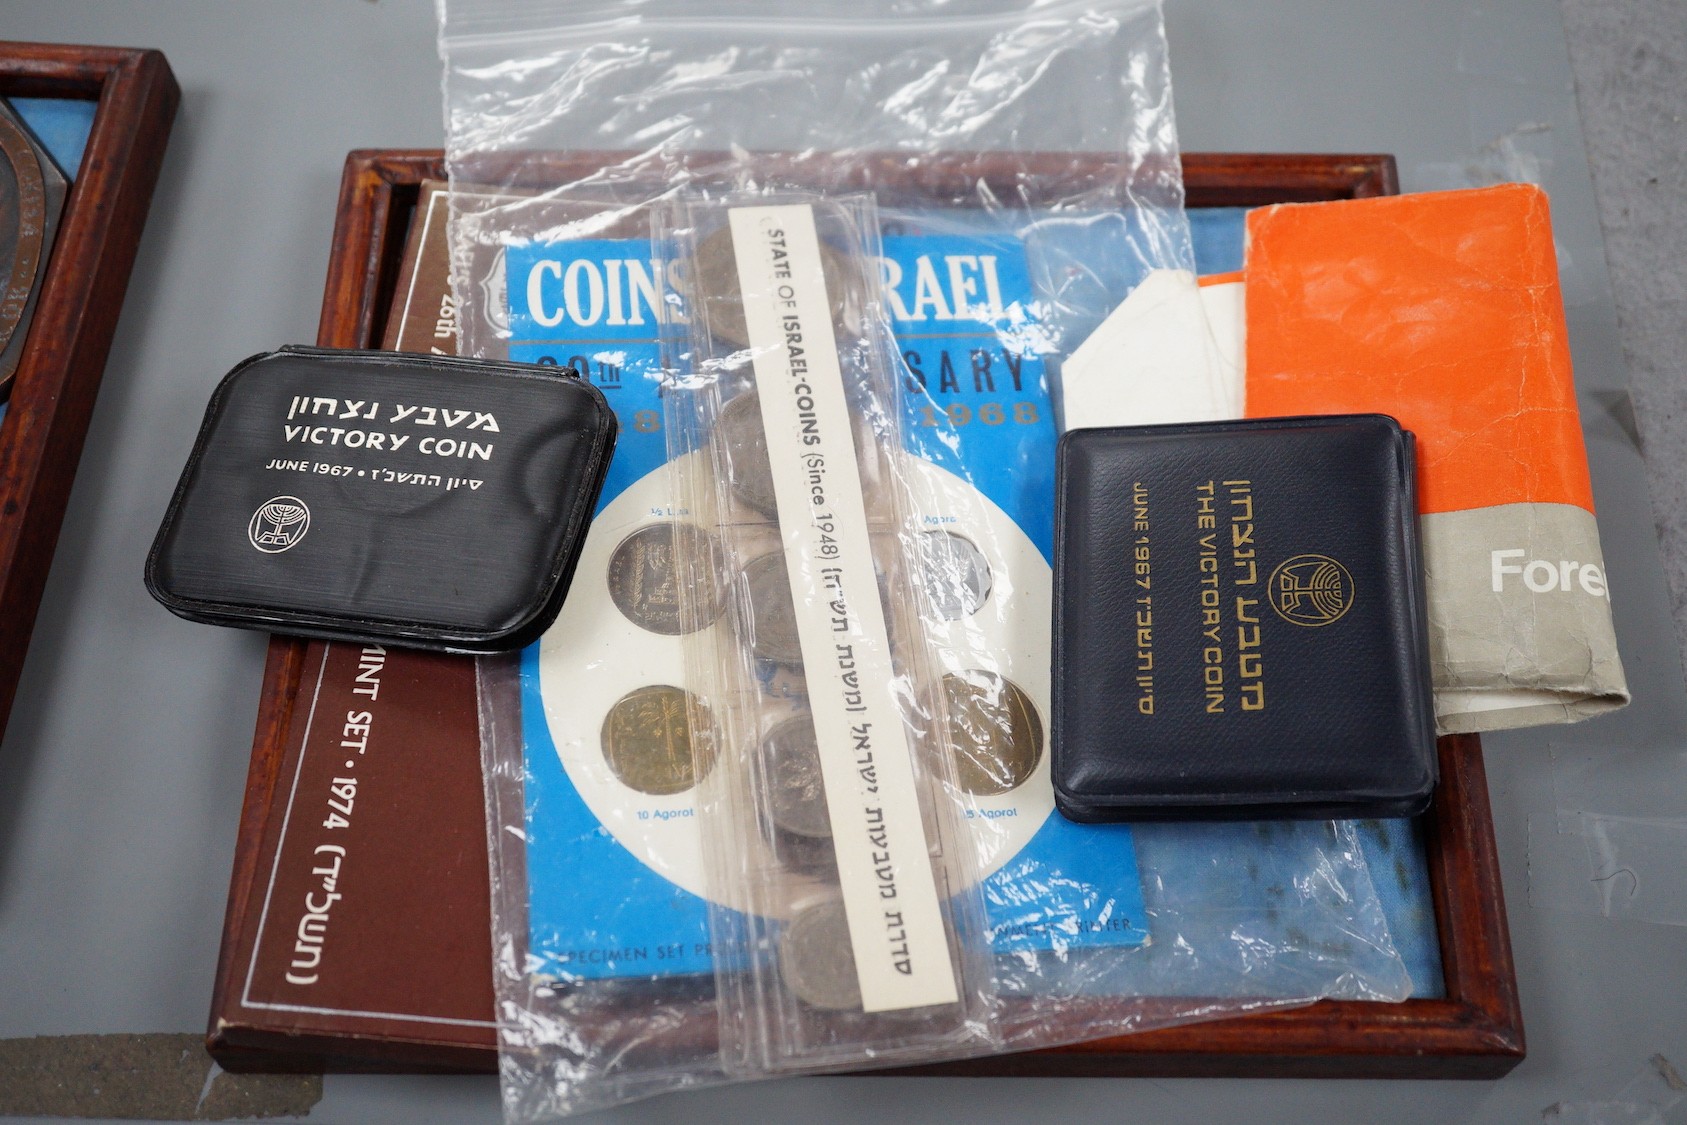 Soviet Union coin, medals, Communist Party badges and Israel commemorative coins and medals